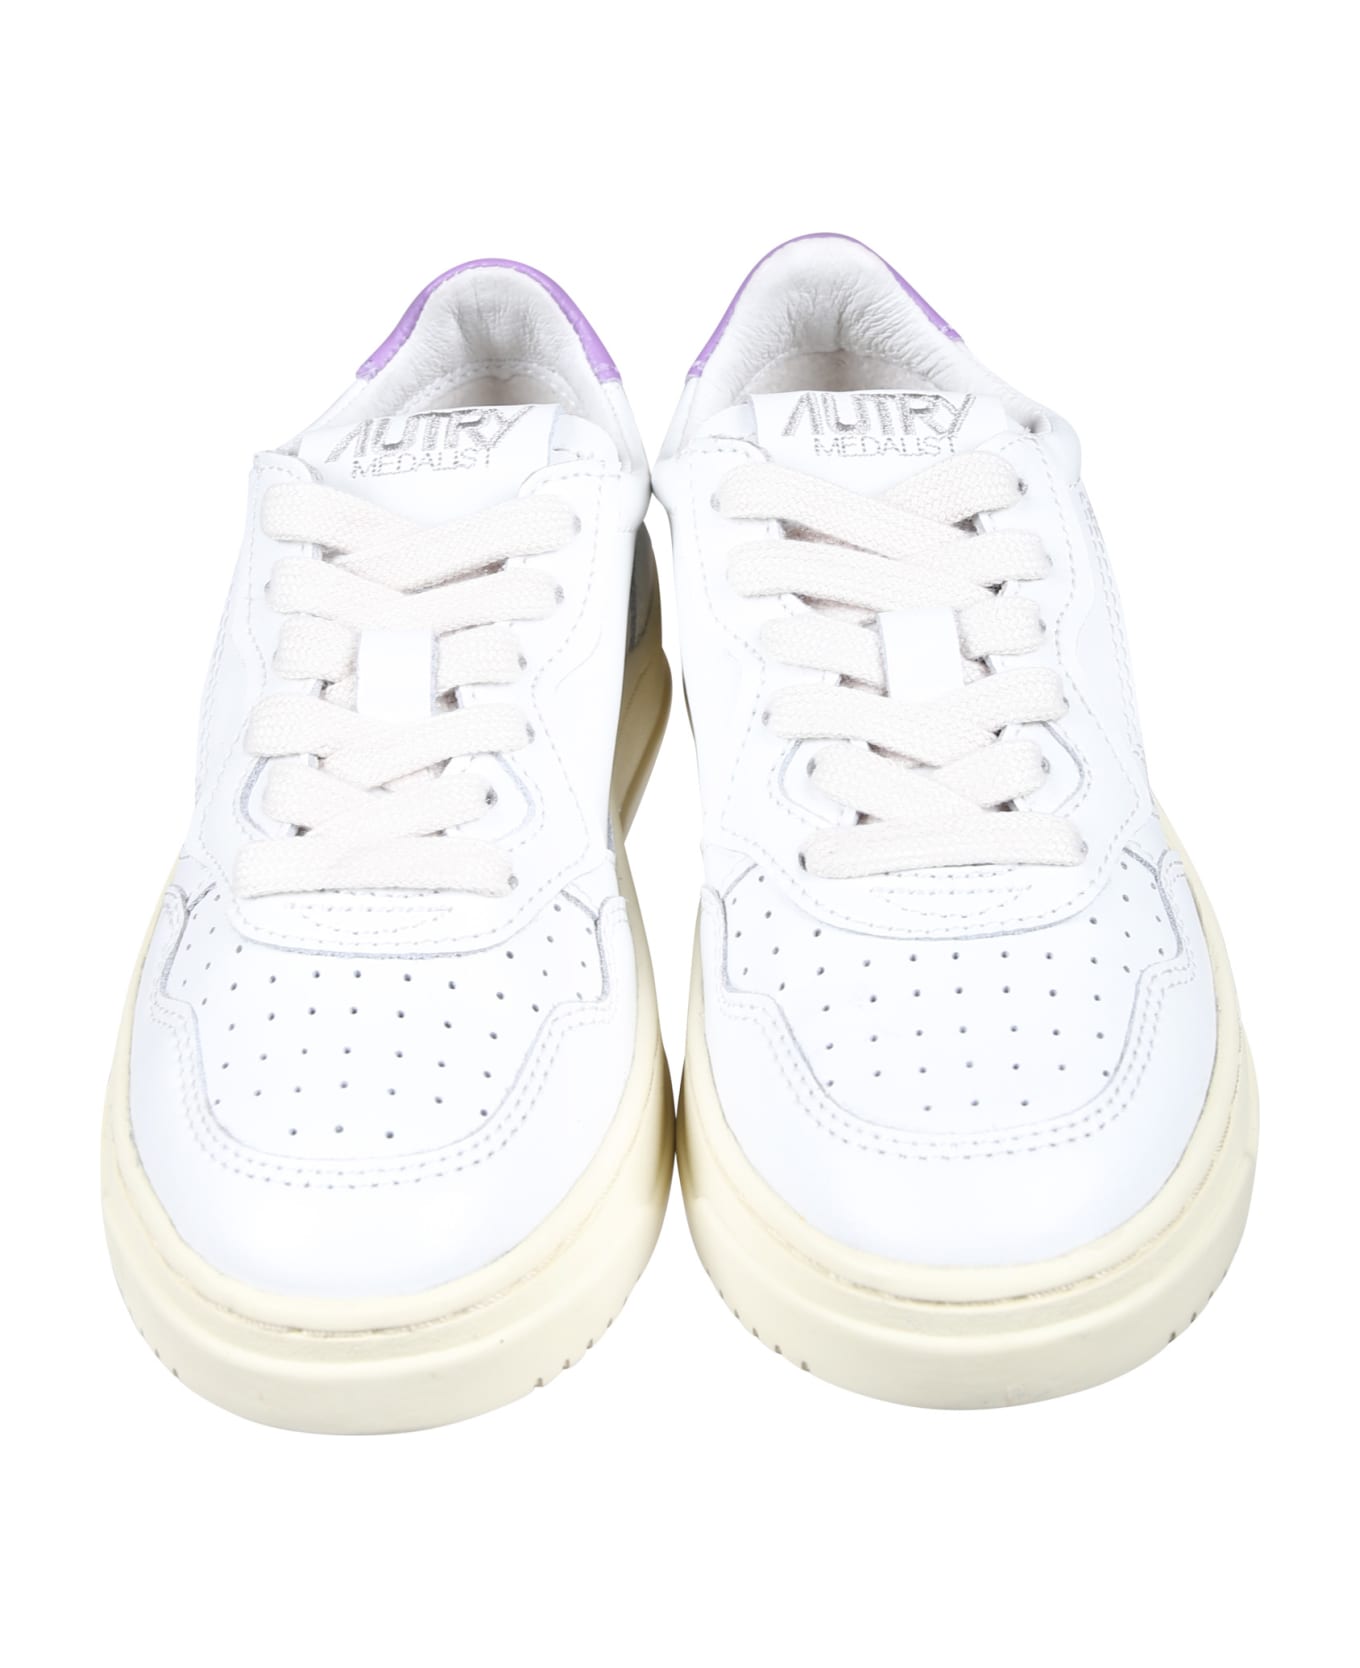 Autry Medalist Low Sneakers For Kids - White シューズ